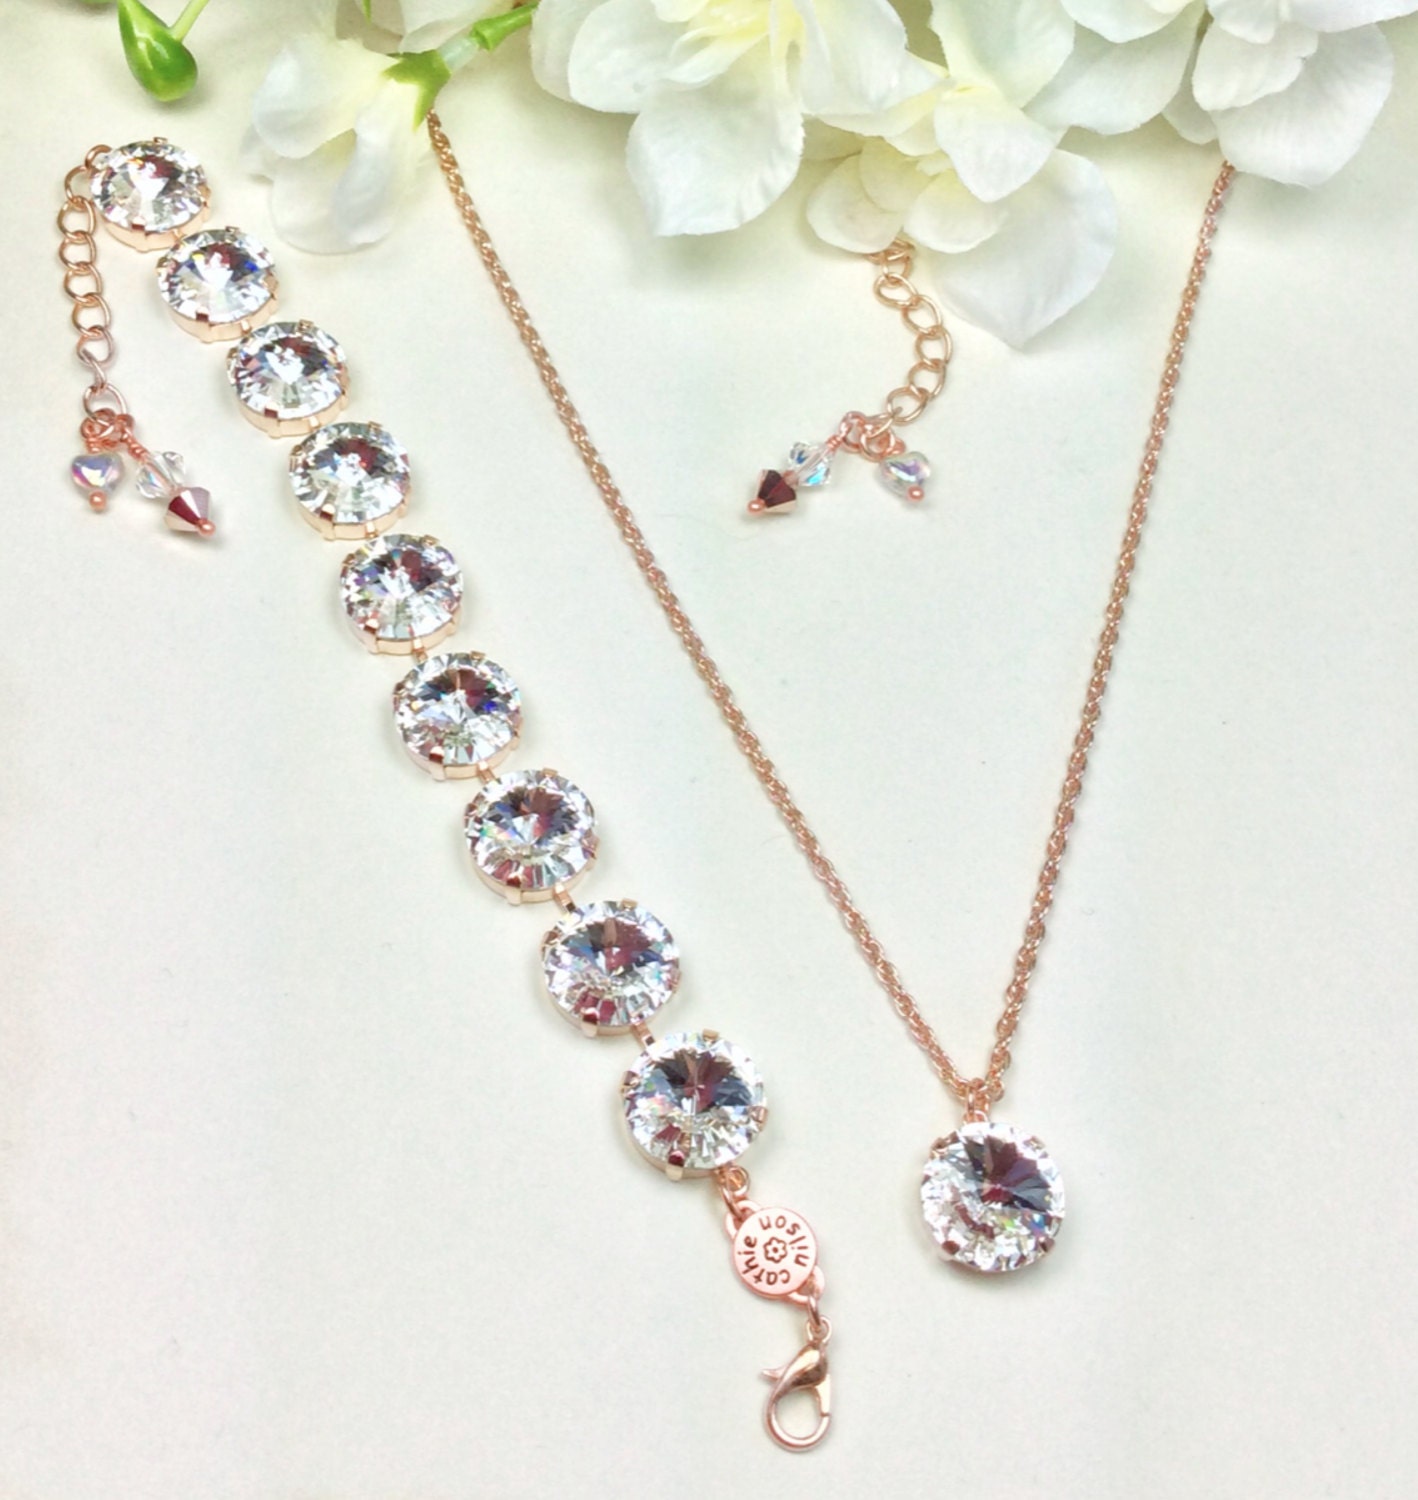 Swarovski Crystal Necklace and Bracelet - 14MM Radiant Crystals Set in Rose Gold- Pure Class- Sparkle & Shimmer - FREE SHIPPING